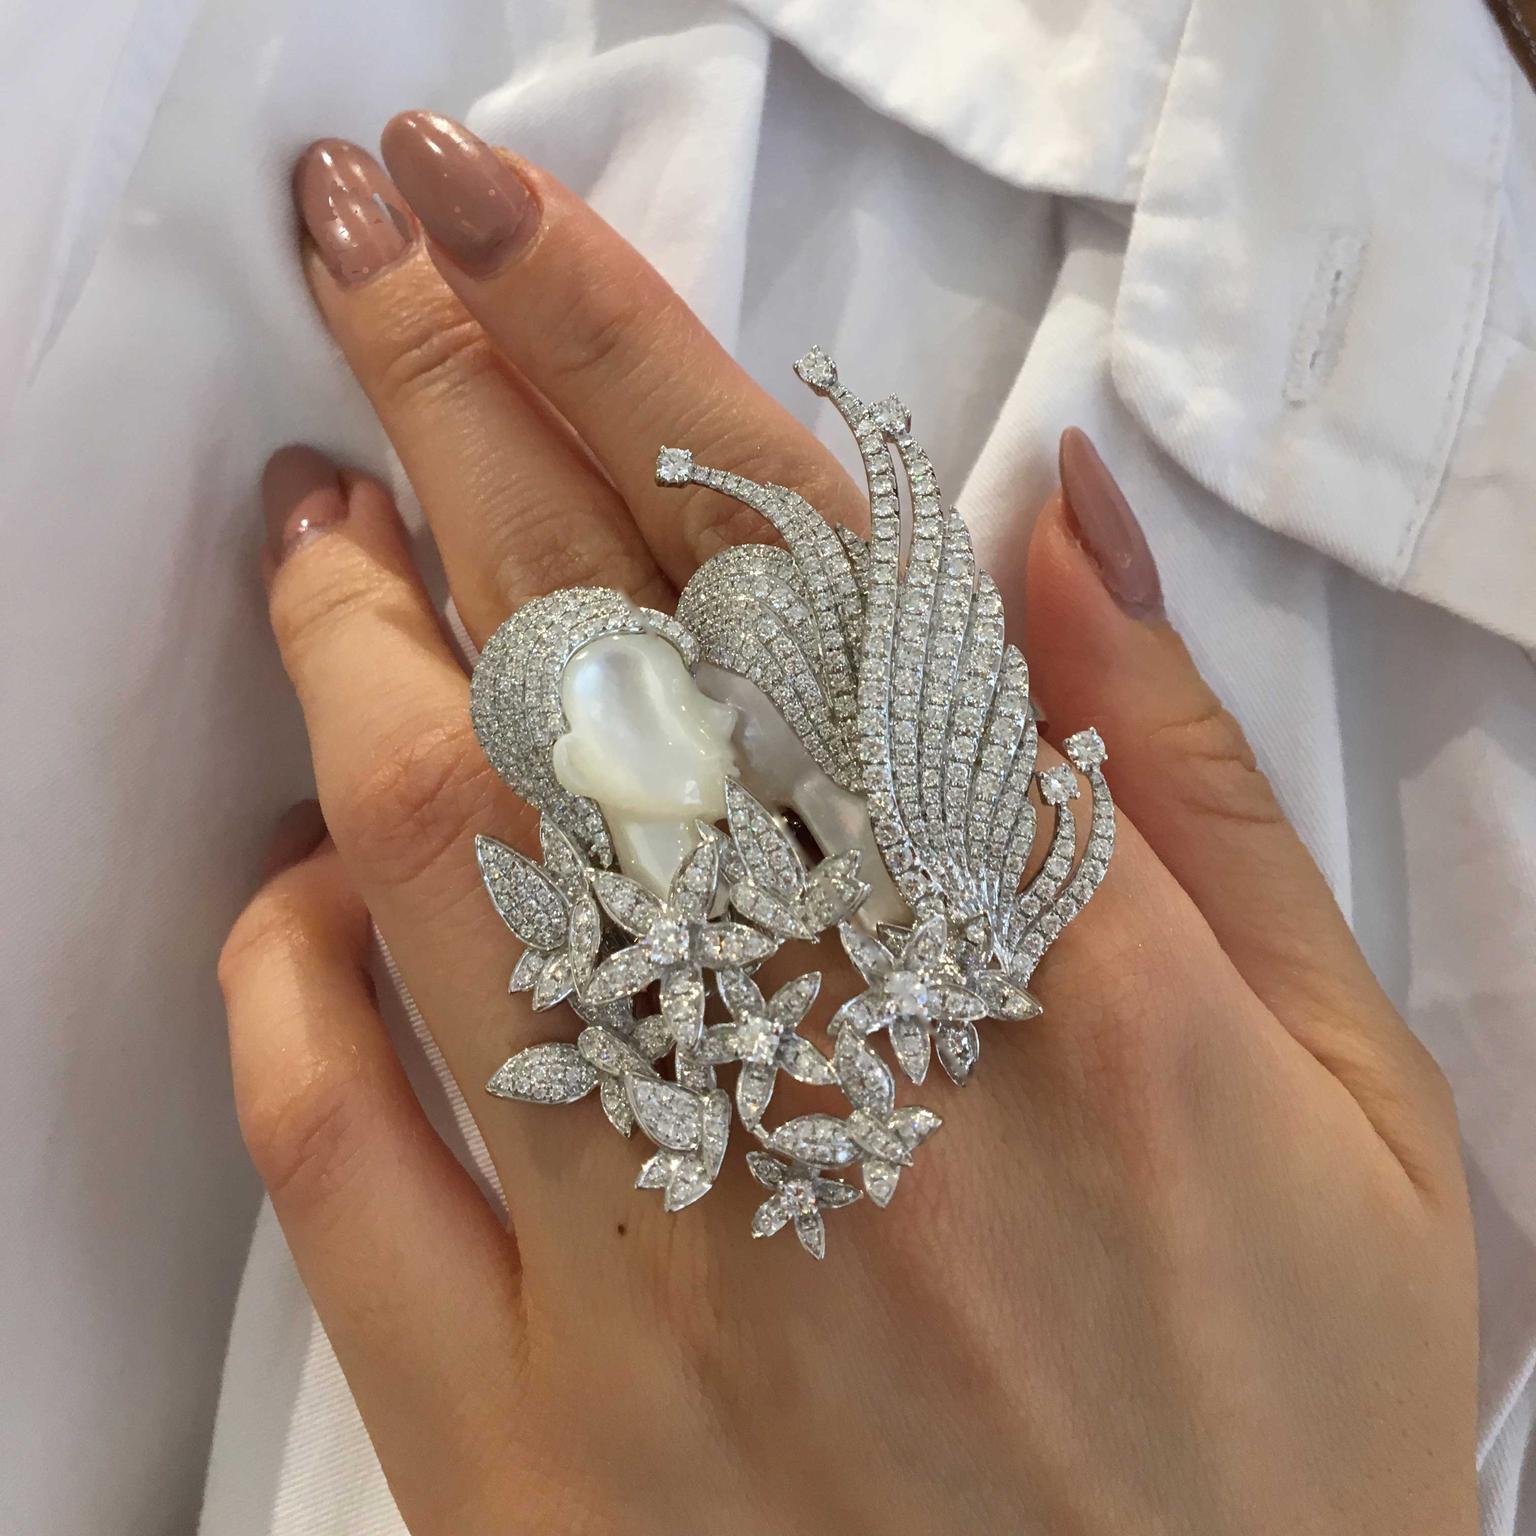 London Jewellery Showroom: a unique jewellery experience